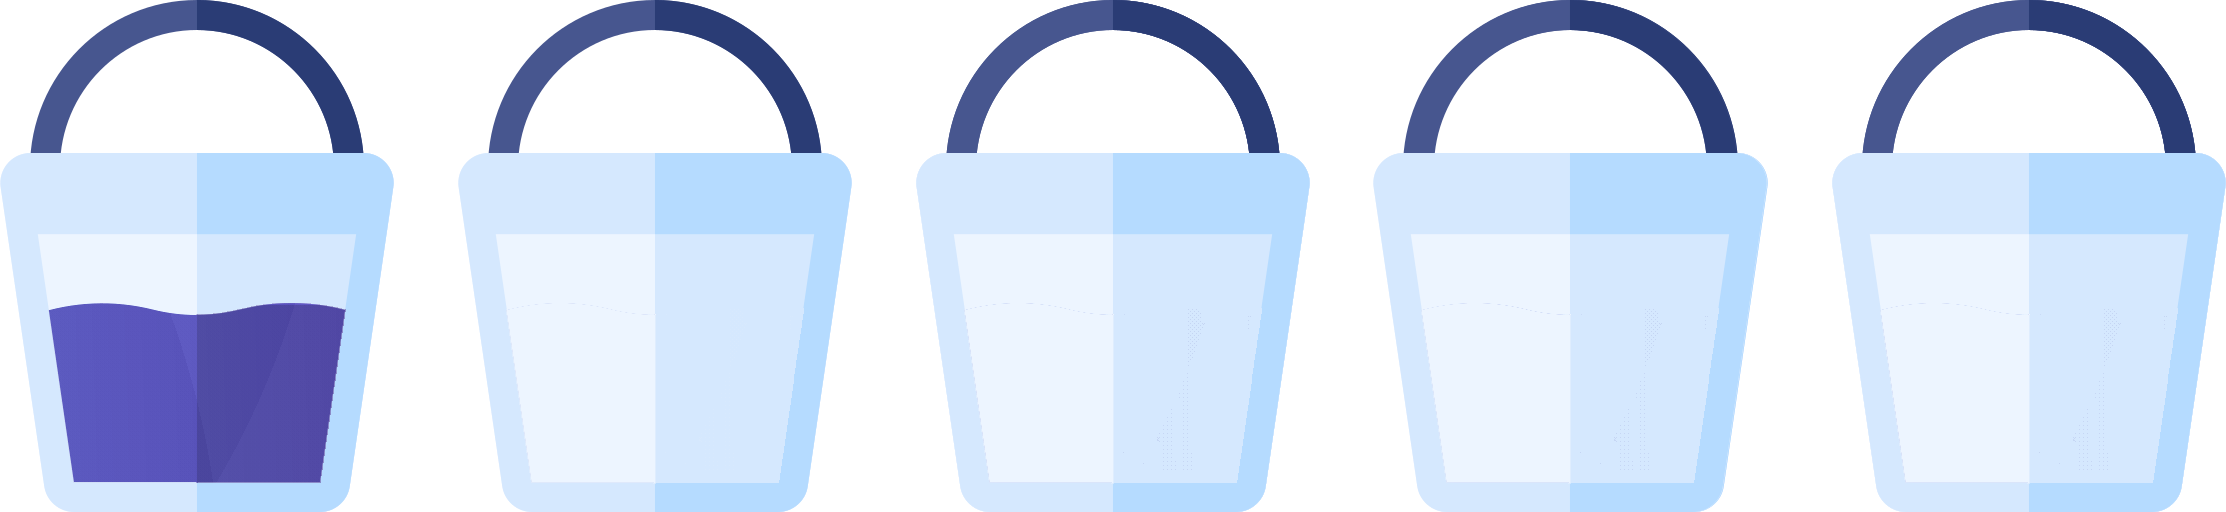 Example of only one bucket being full